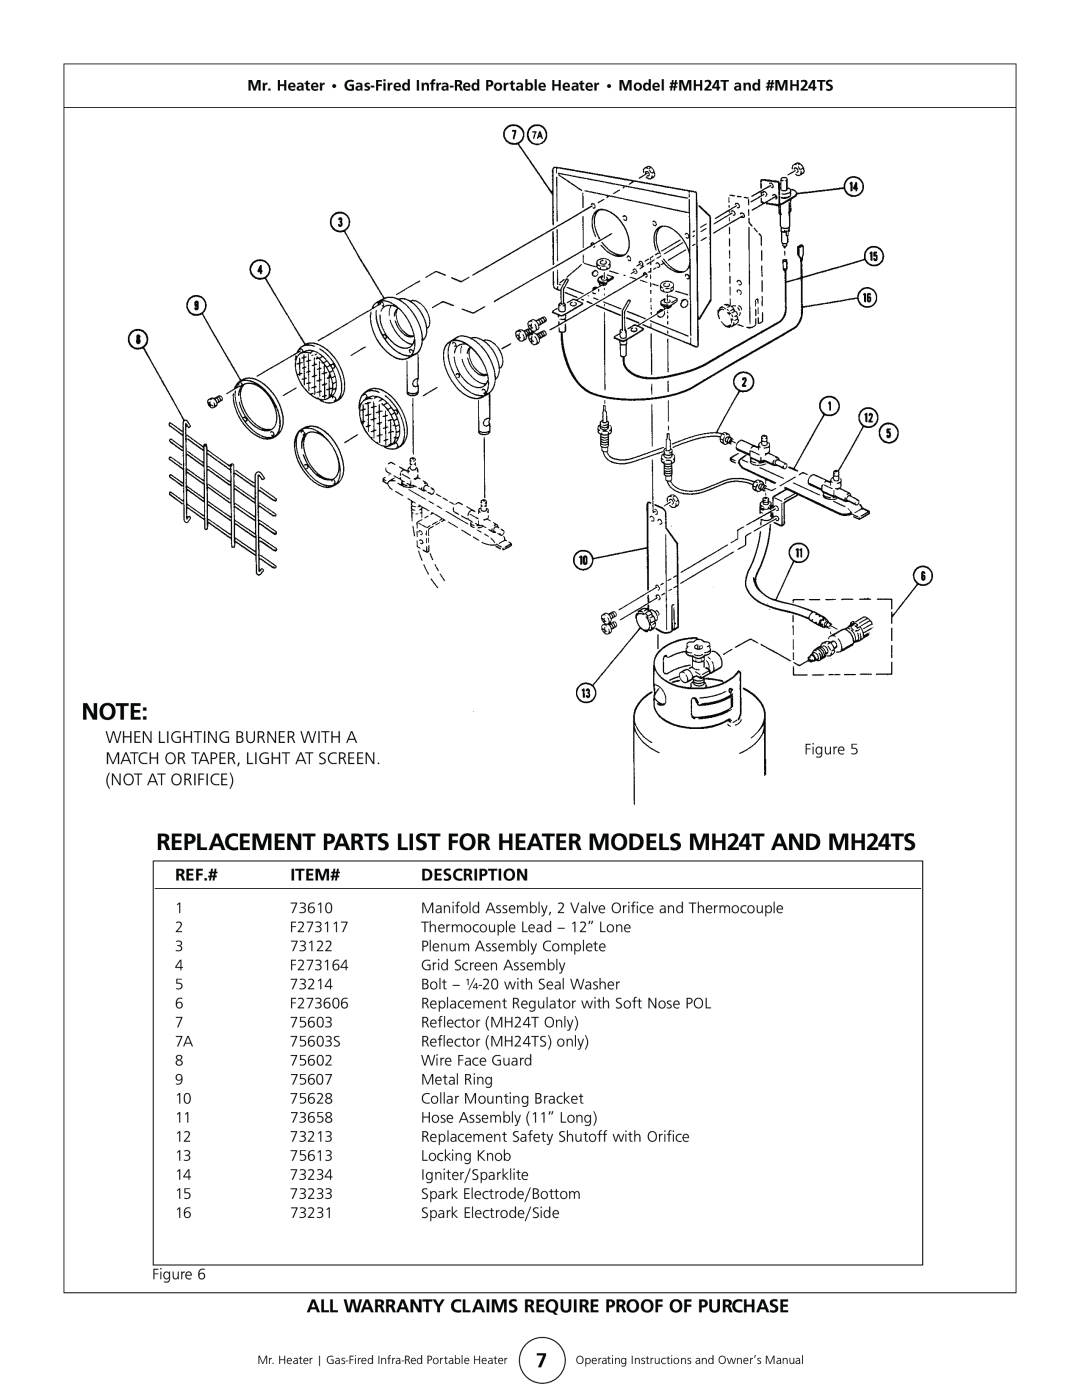 Enerco REPLACEMENT PARTS LIST FOR HEATER MODELS MH24T AND MH24TS, All Warranty Claims Require Proof Of Purchase 